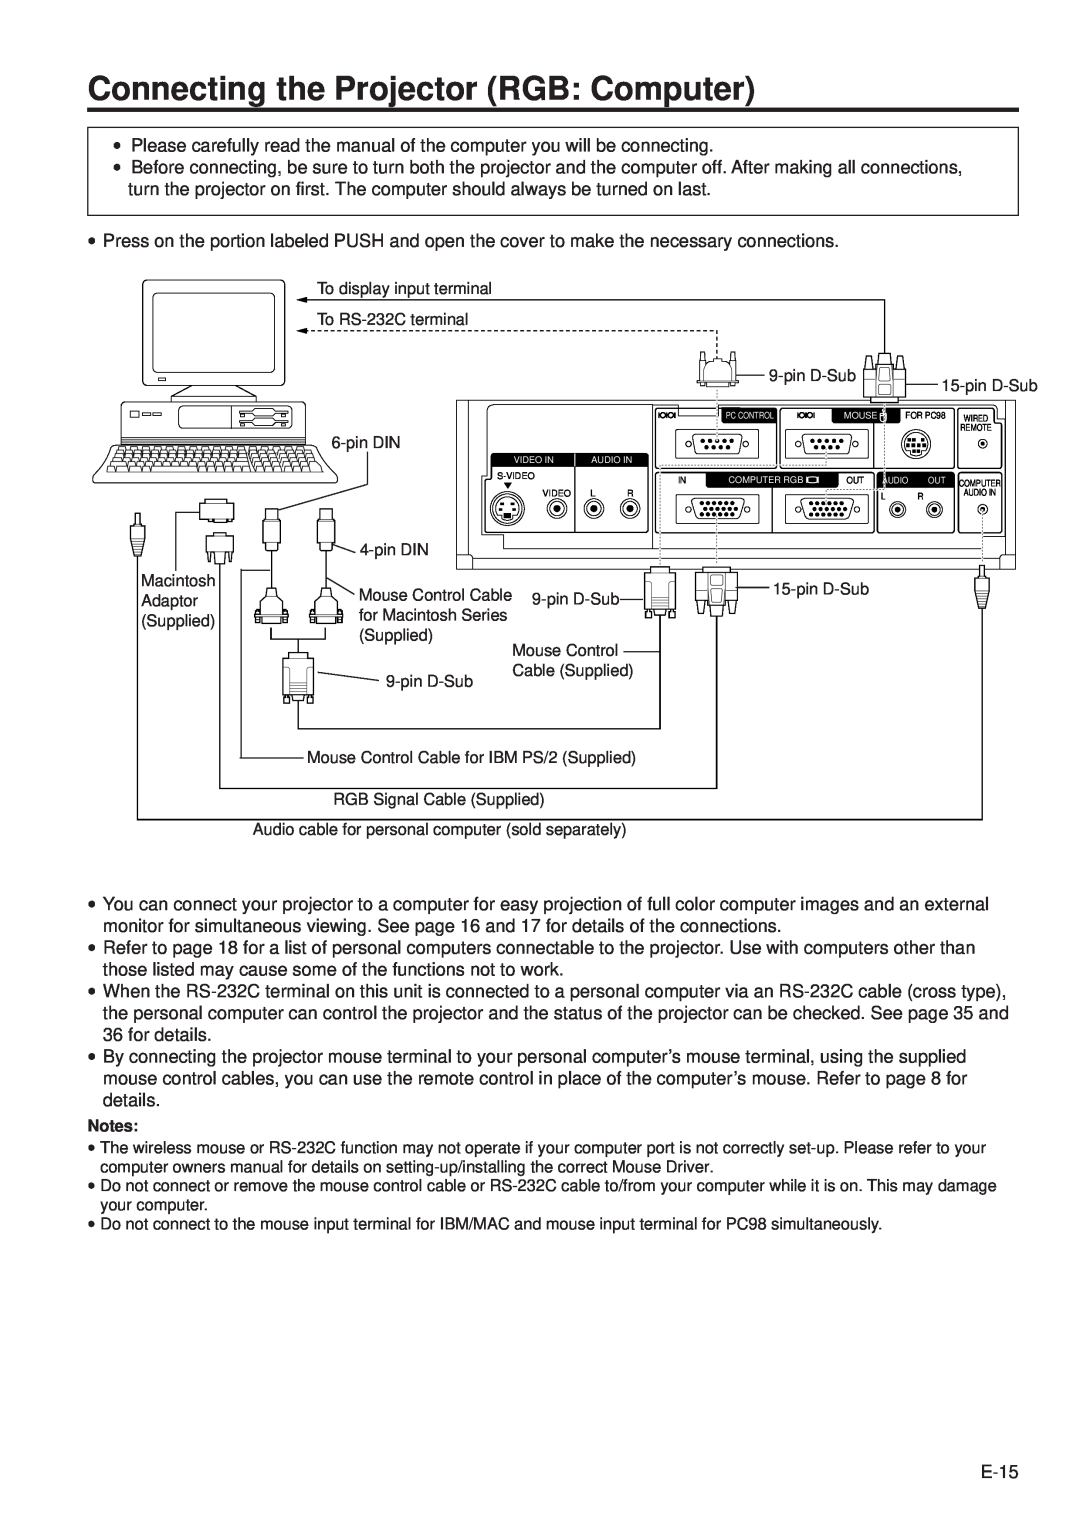 Sharp PG-D100U operation manual Connecting the Projector RGB Computer 